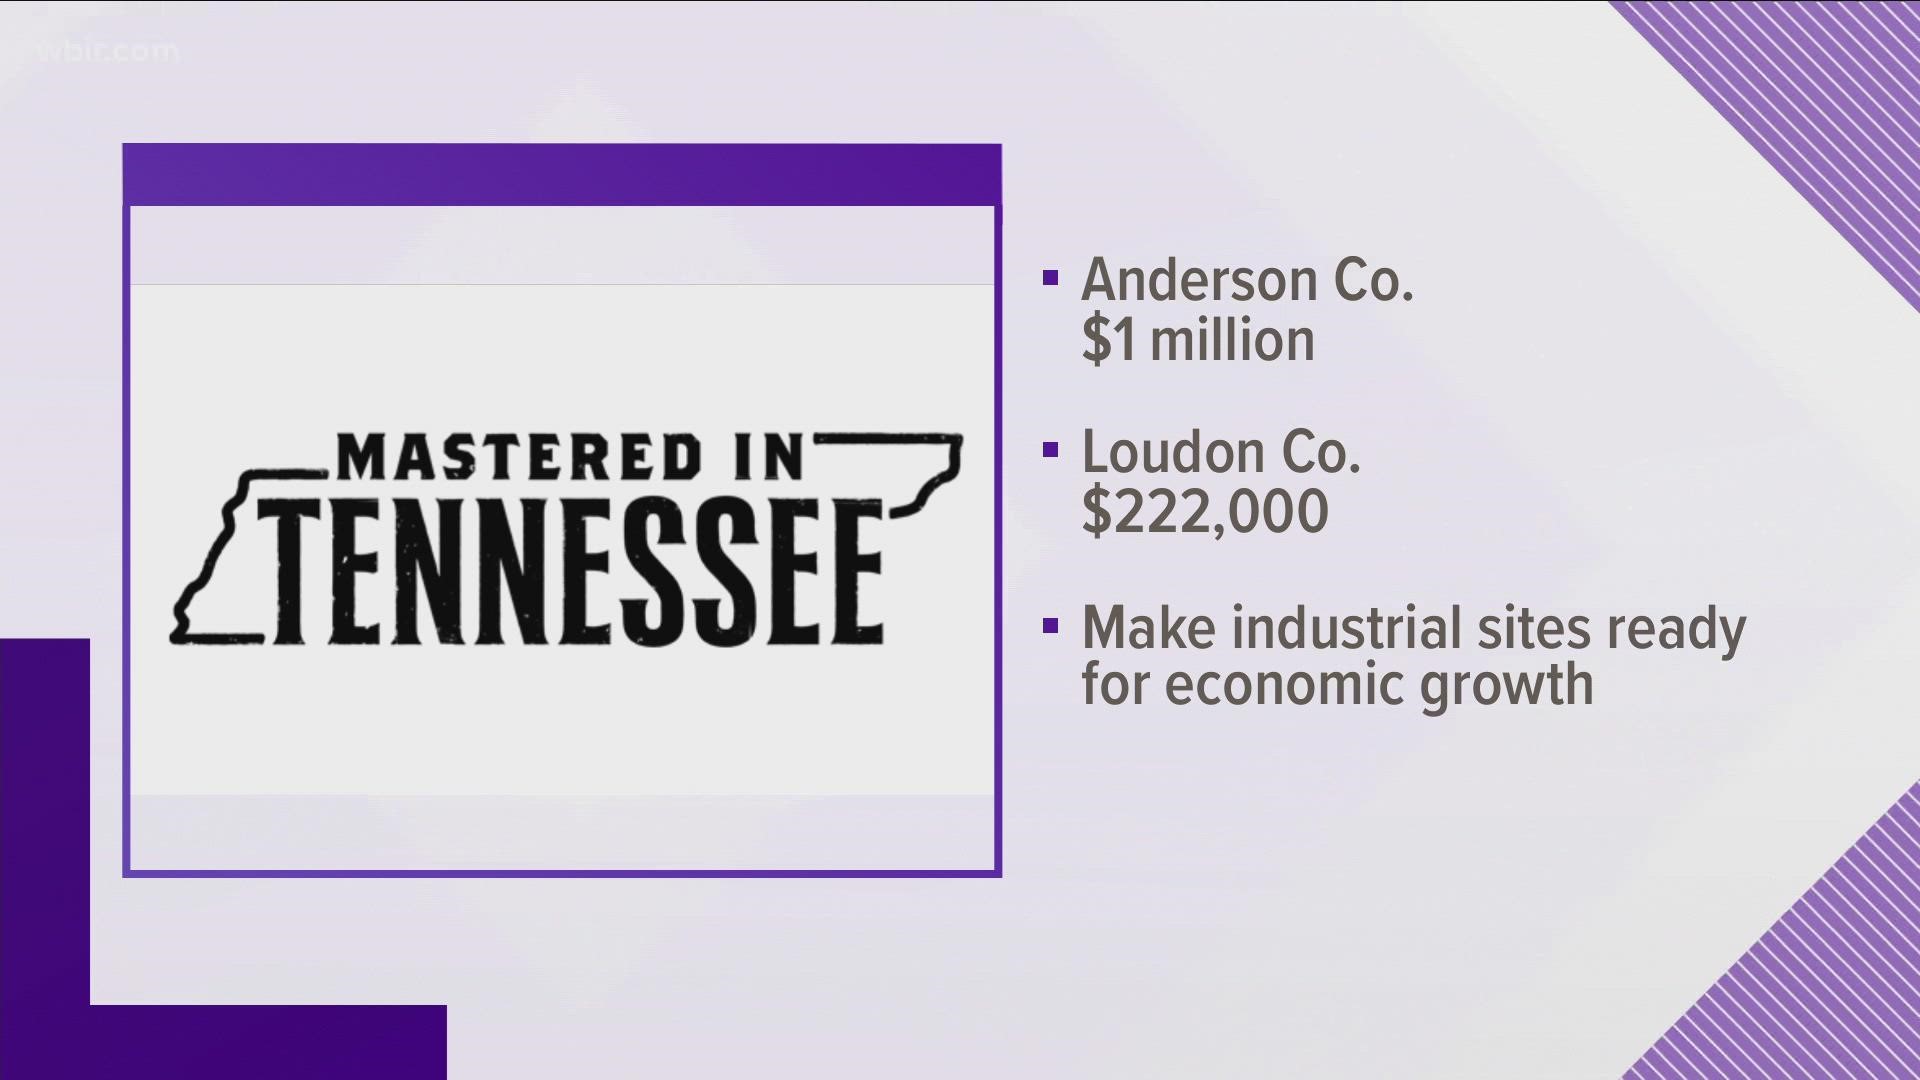 The money goes to Anderson and Loudon counties. The goal is to make industrial sites ready for projects that attract jobs to rural parts of the state.